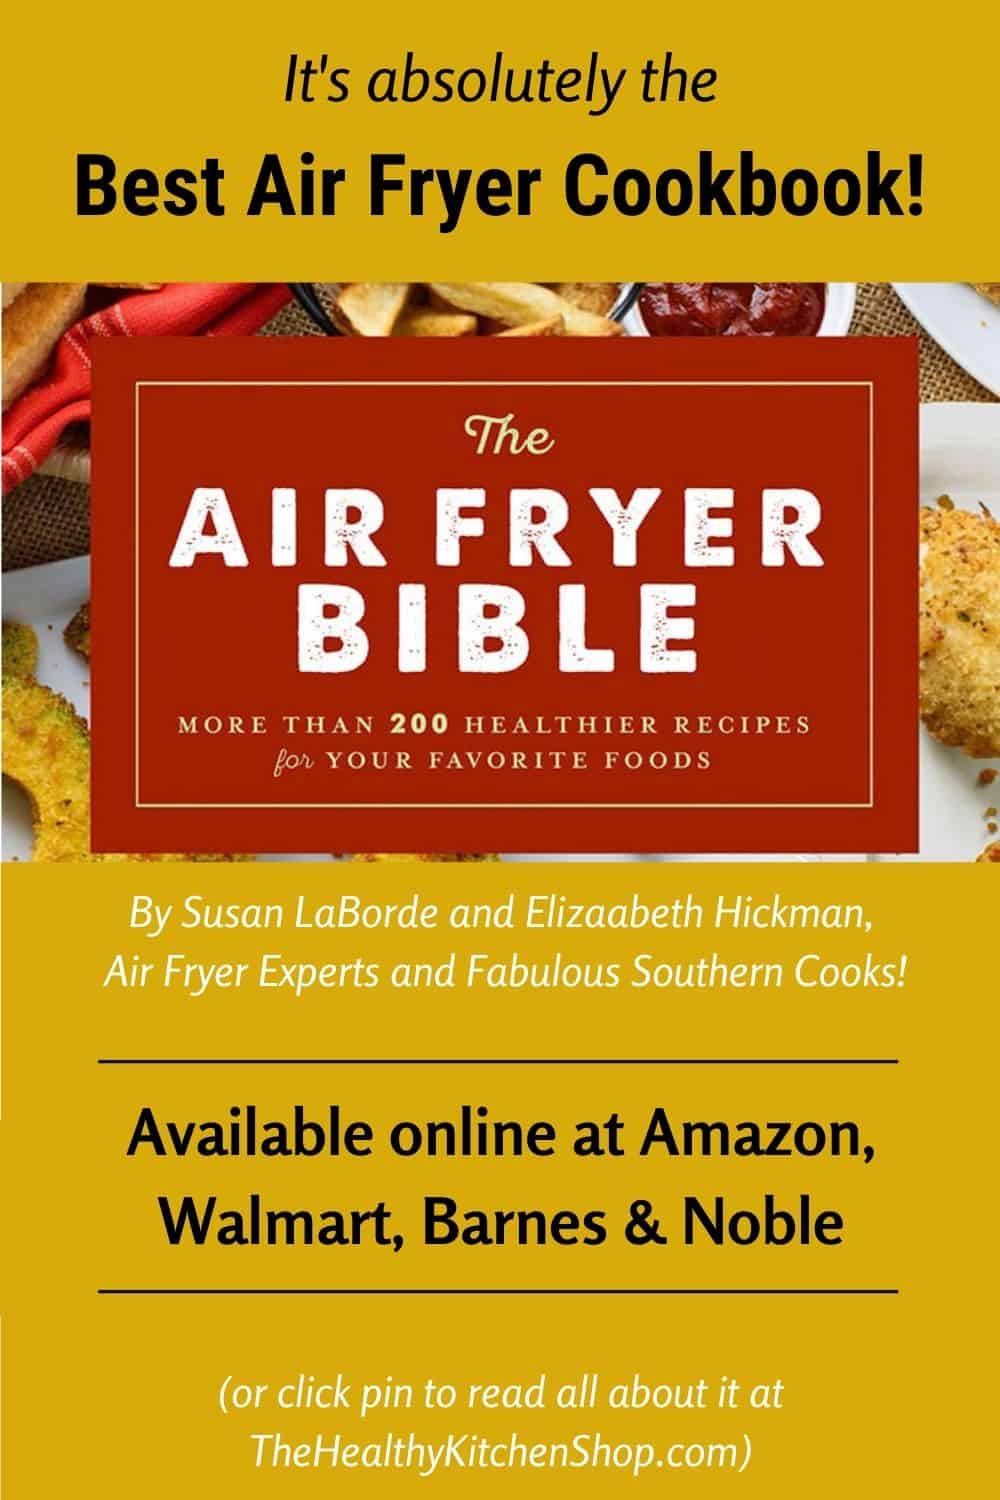 It's Absolutely the Best Air Fryer Cookbook